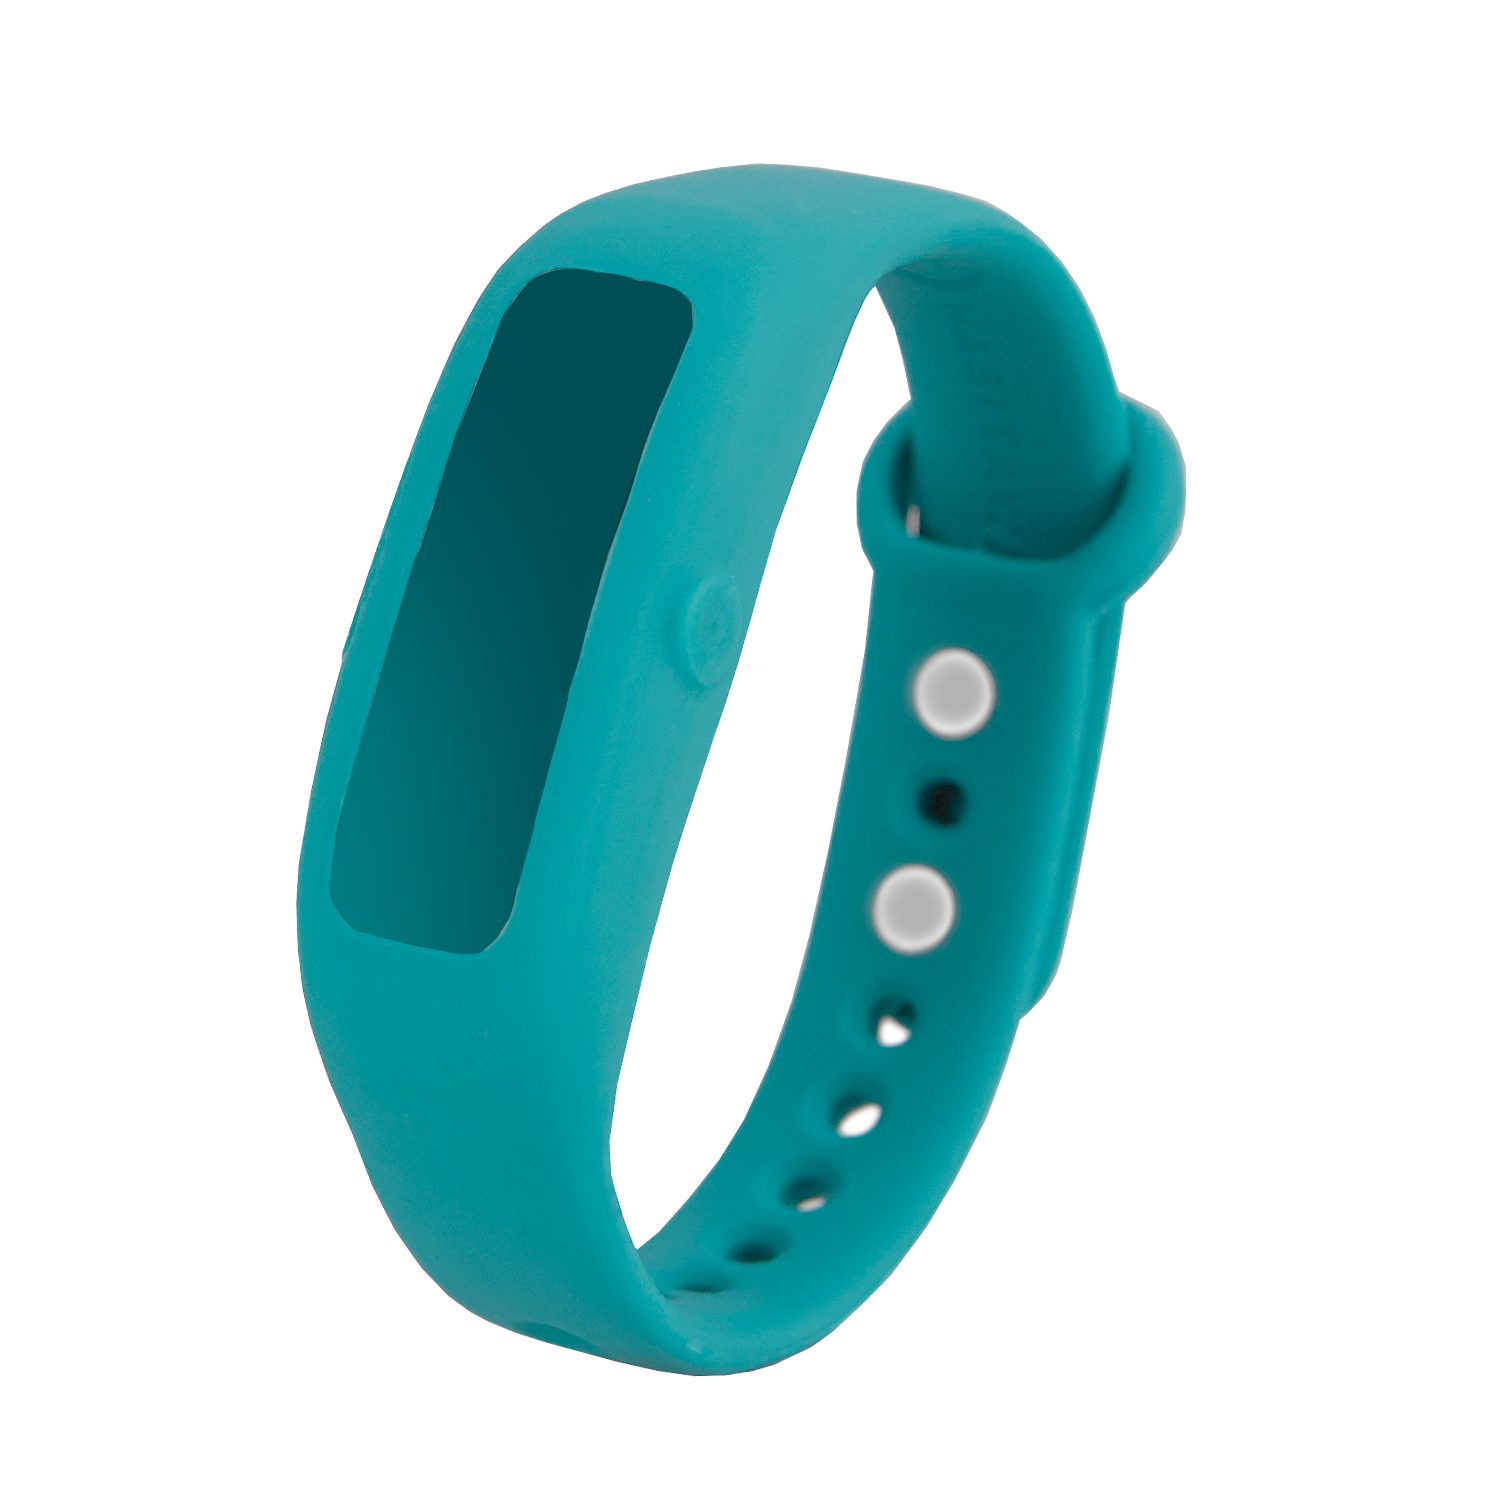 A Sporty Keen - Teal Strap fitness tracker with a button on the side.